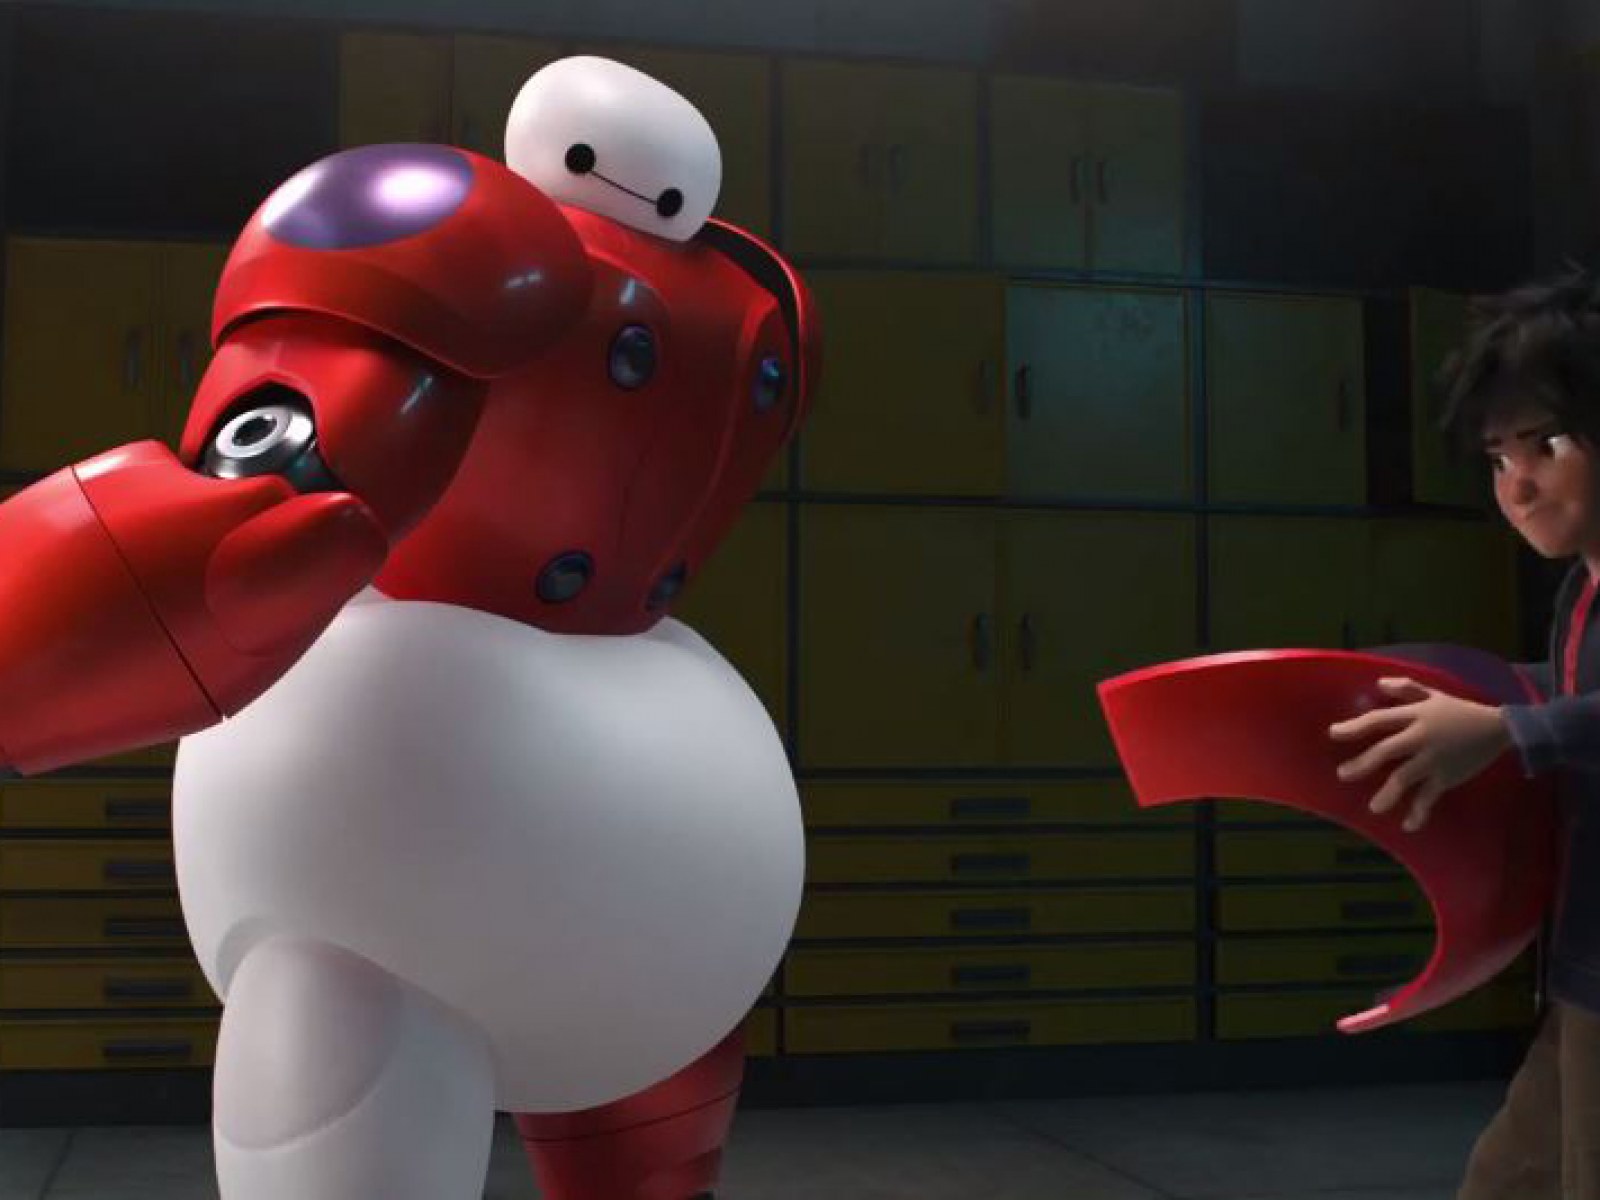 Big Hero 6 First Trailer for Disney & Marvel Animated Feature